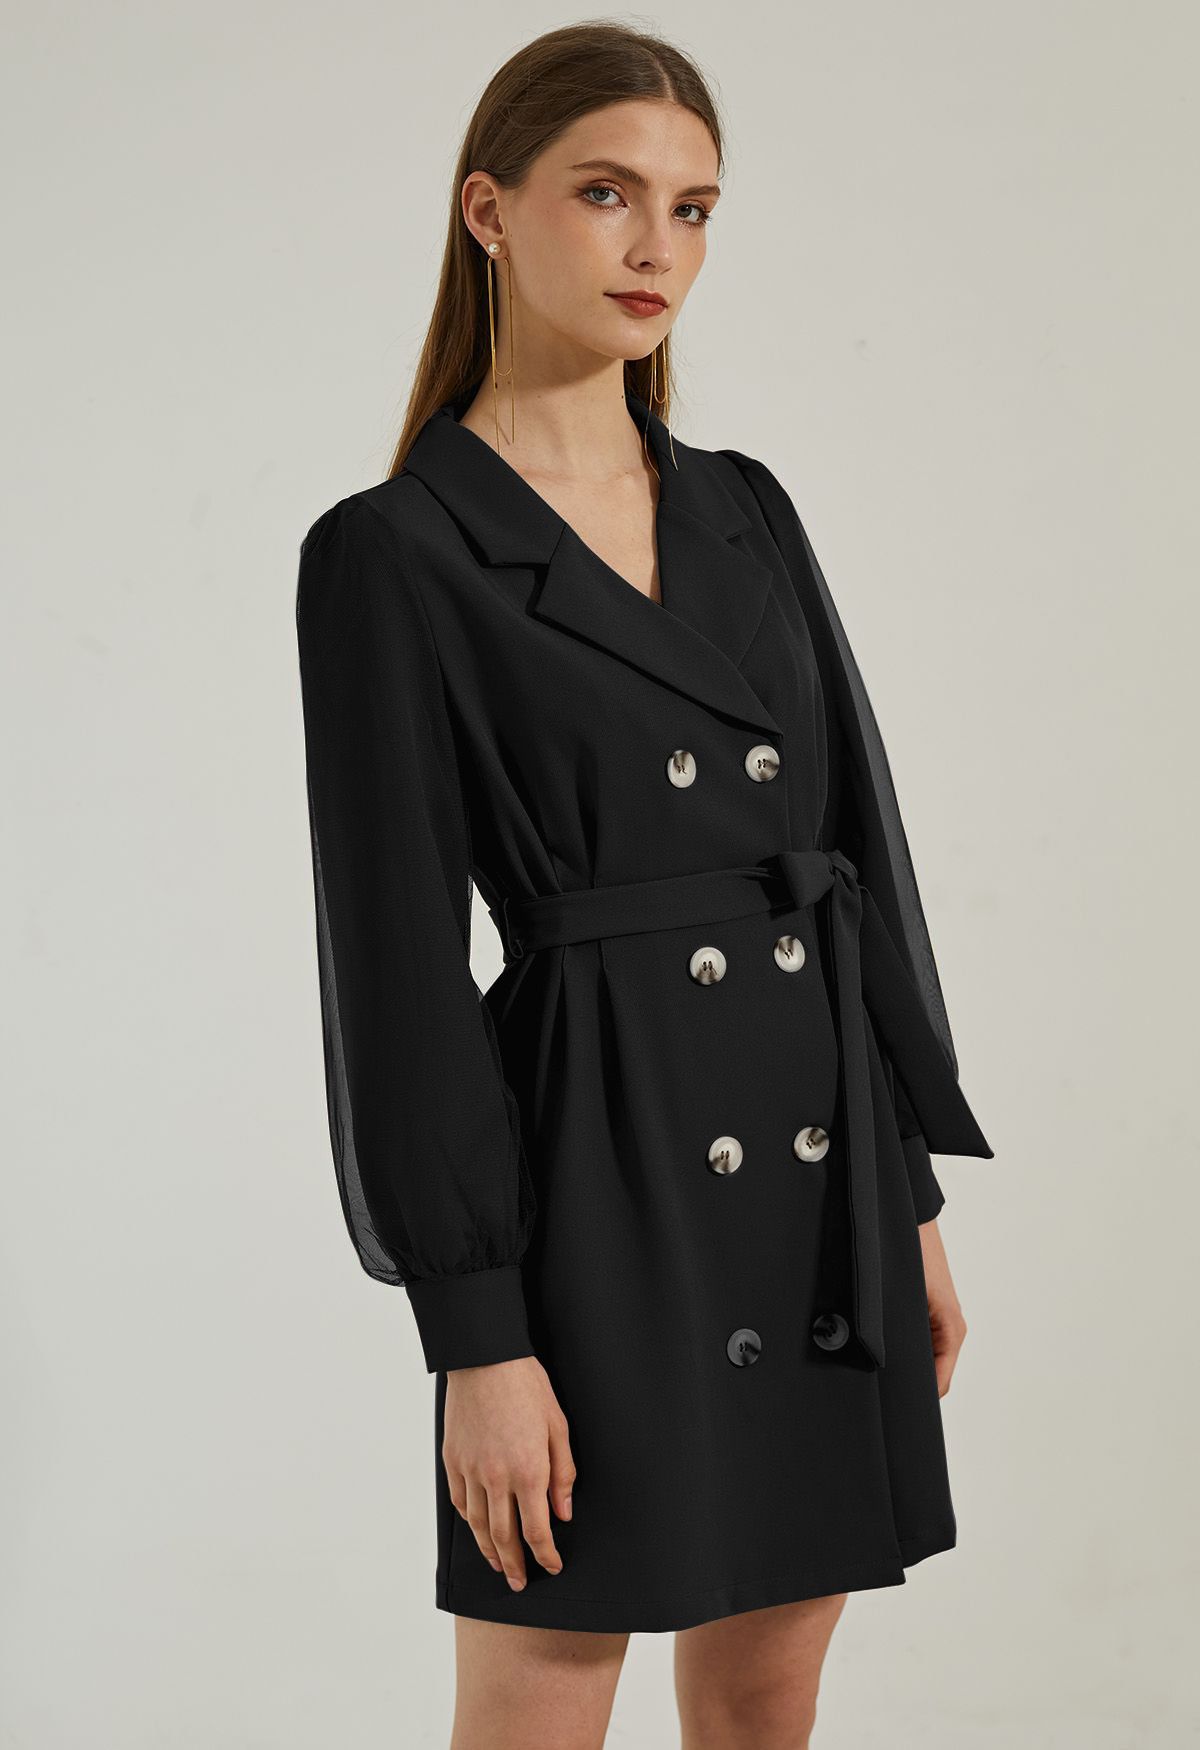 Mesh Overlay Sleeve Double Breasted Blazer Dress in Black